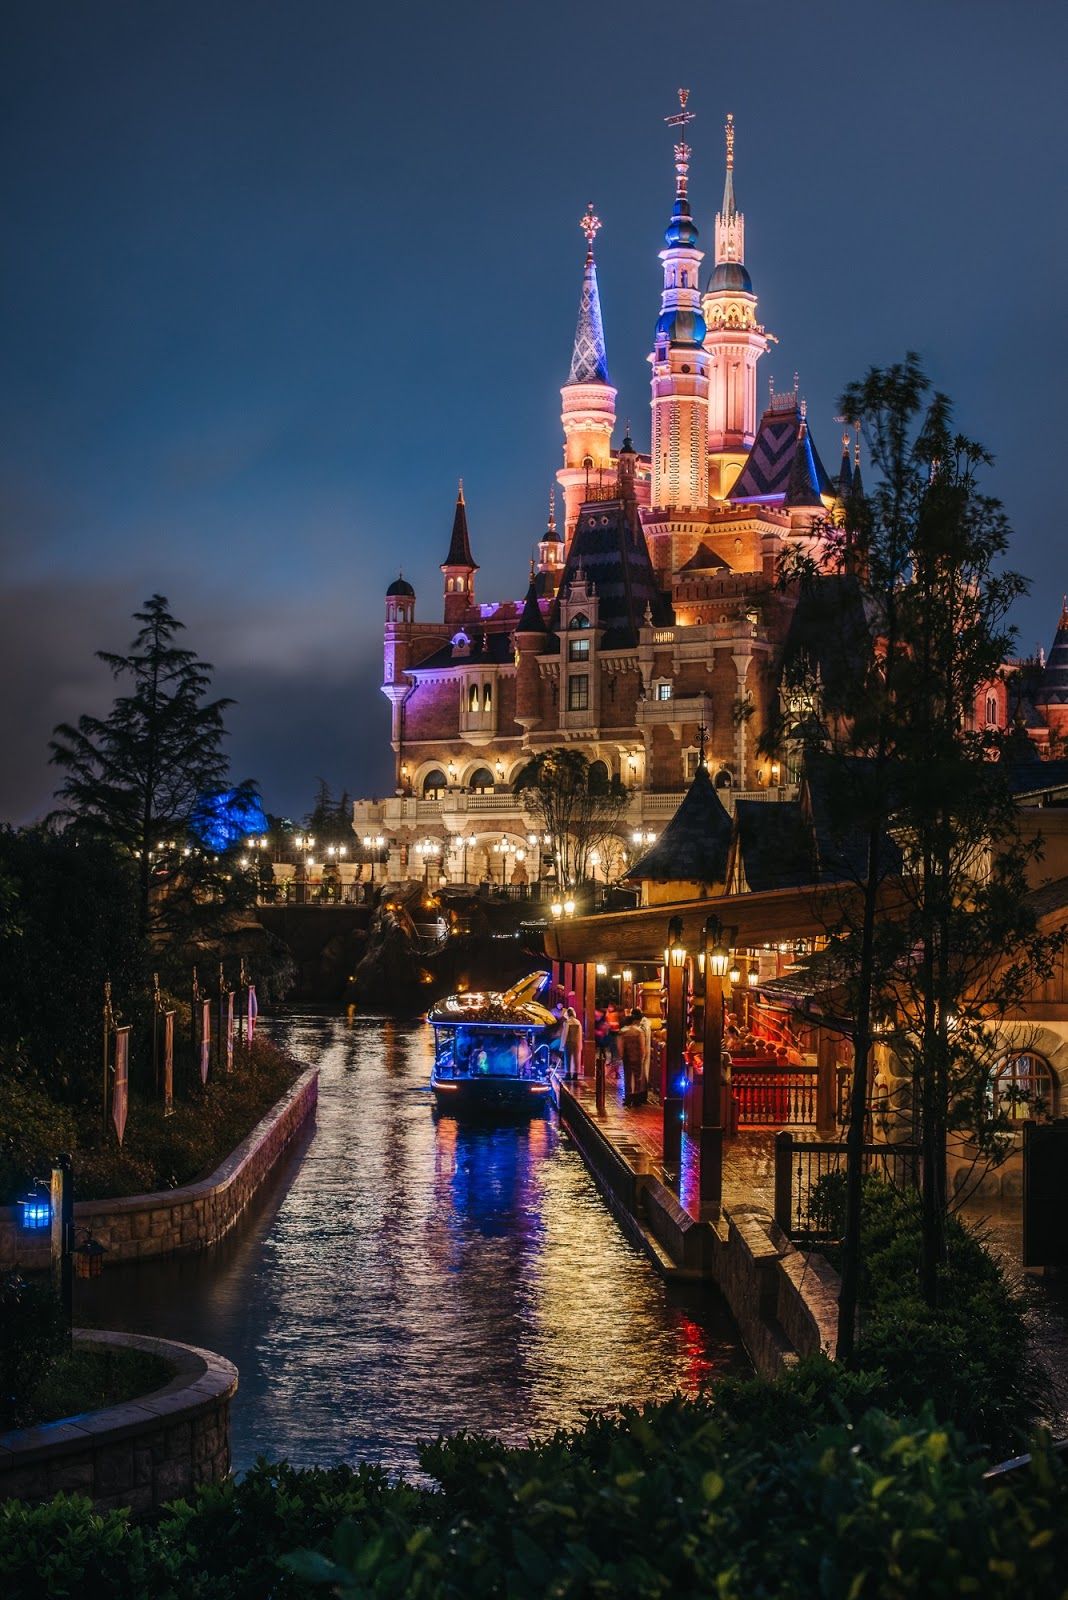 A castle is lit up at night - Disneyland